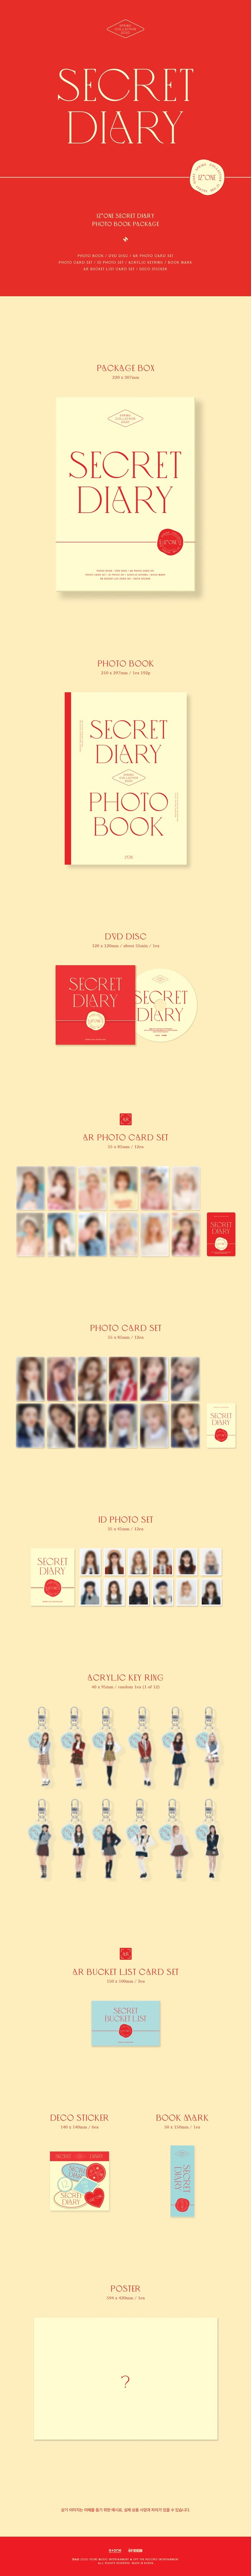 1 DVD
1 Photo Book (192 pages)
12 AR Card
12 Photo Card
12 ID Photo
1 Keyring
2 AR Bucket Lists
6 Stickers
1 Bookmark